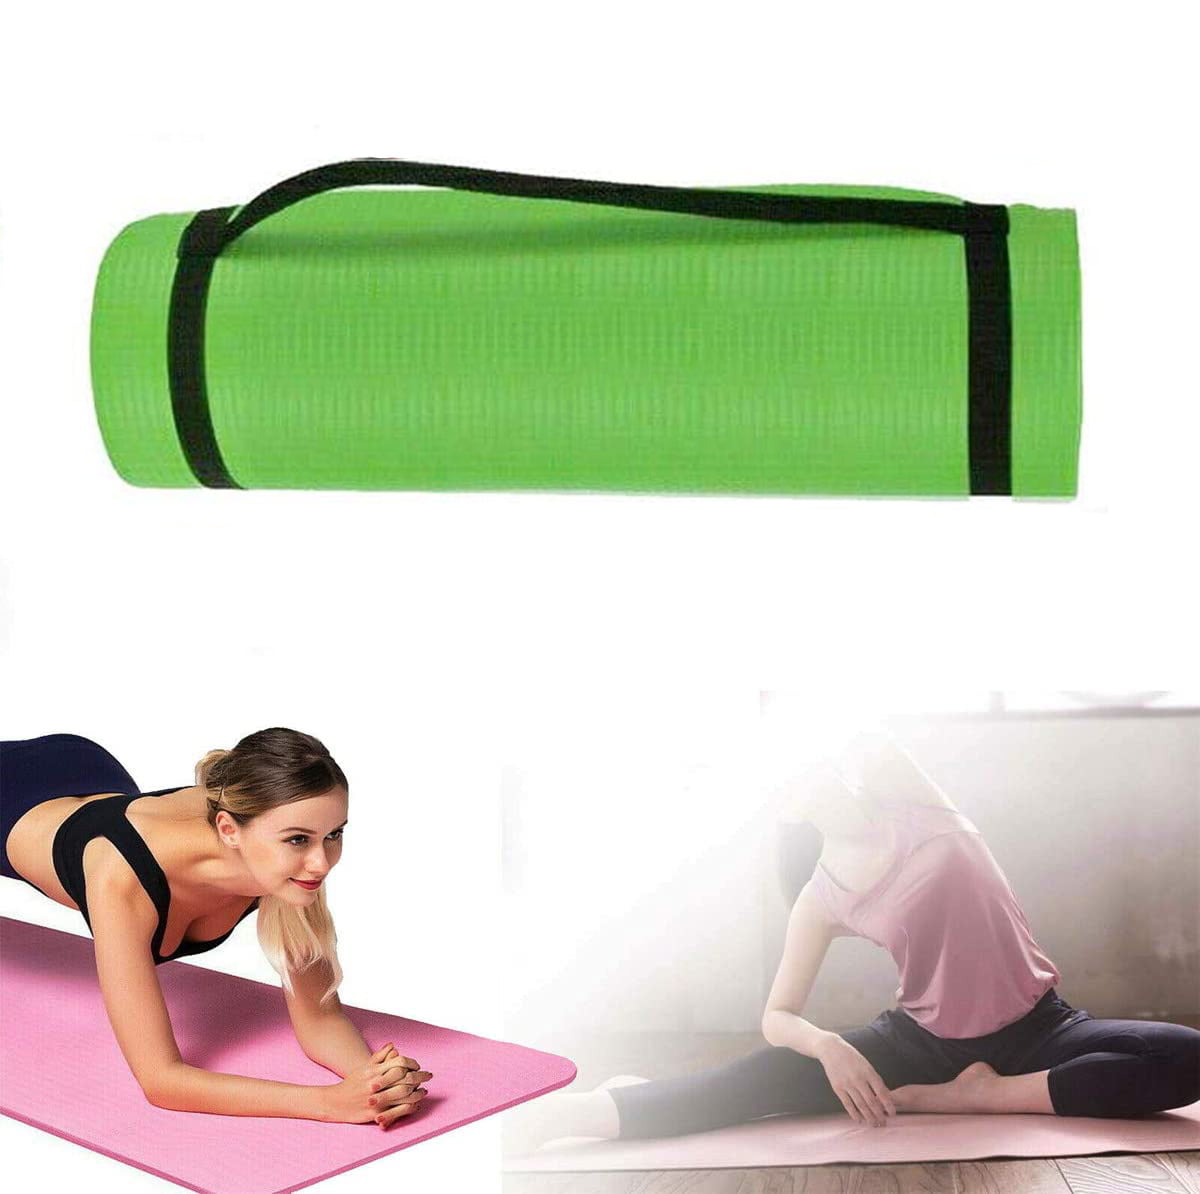 Yoga Mat Gym Exercise Thick Fitness Physio Pilates Soft Mats Non Slip Carrier 